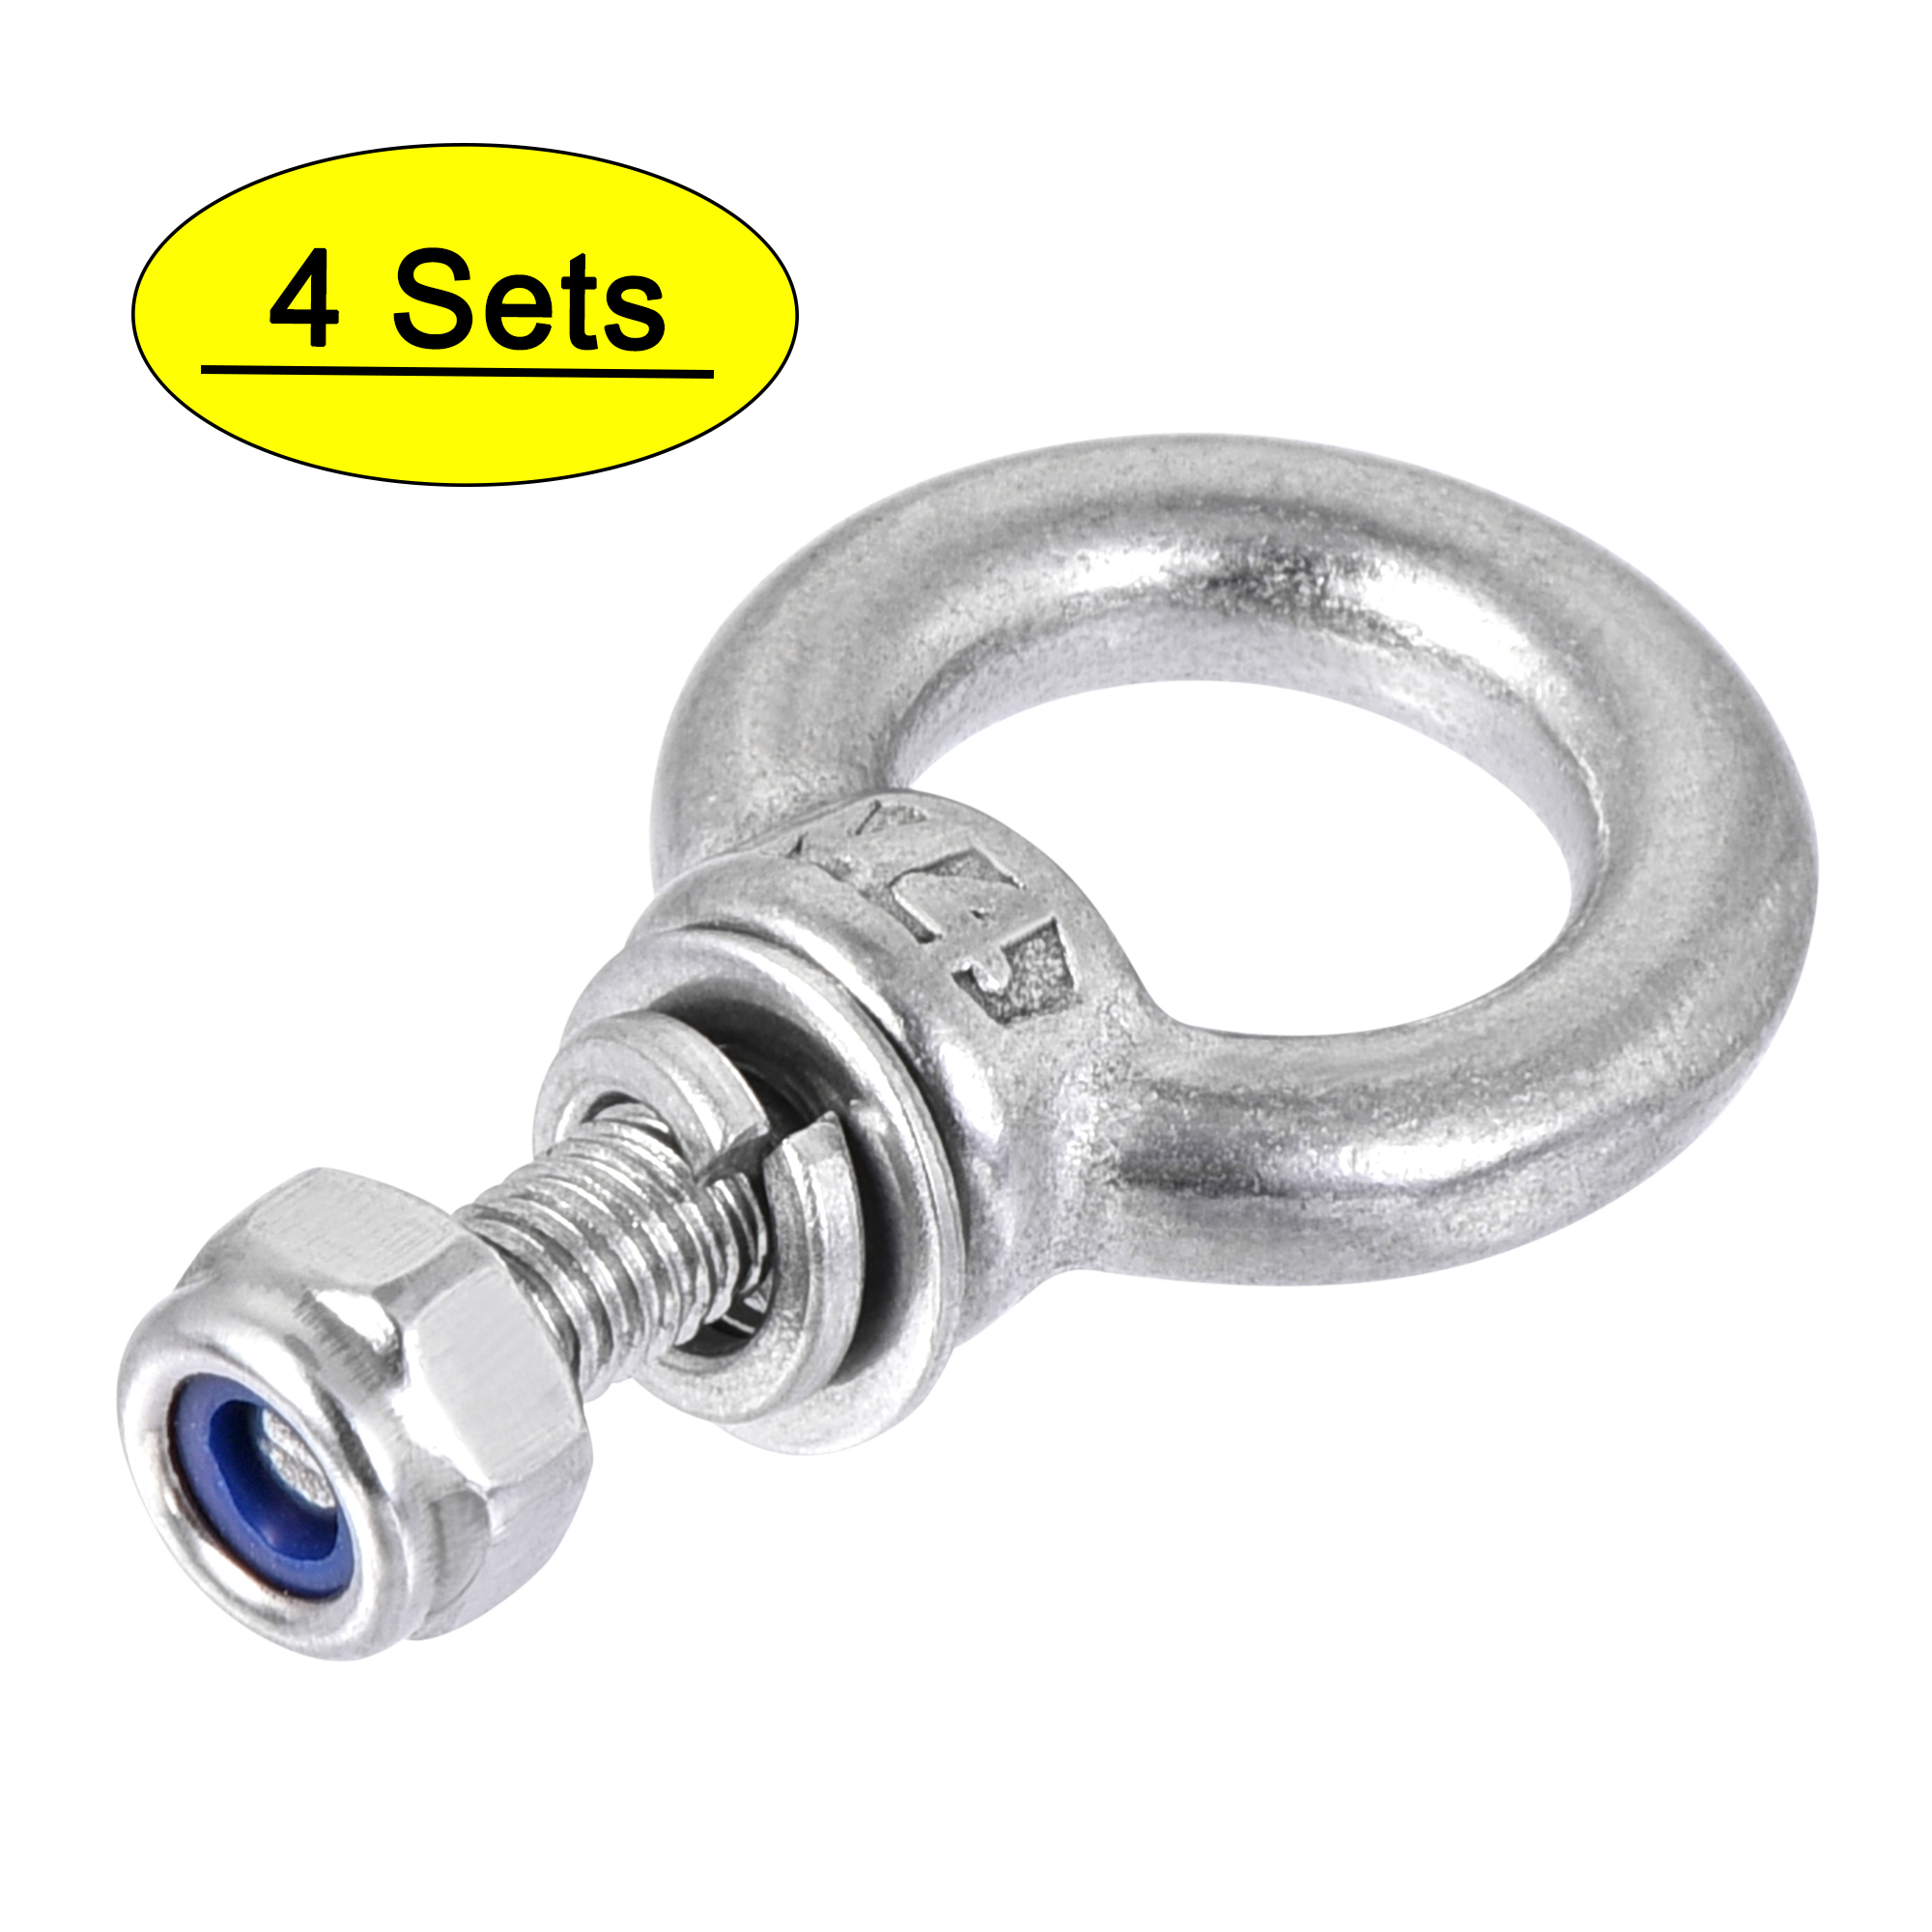 Lifting Eye Bolt M4 x 11mm Male Thread with Hex Screw Nut Gasket Flat  Washer for Hanging, Stainless Steel, 4 Sets 